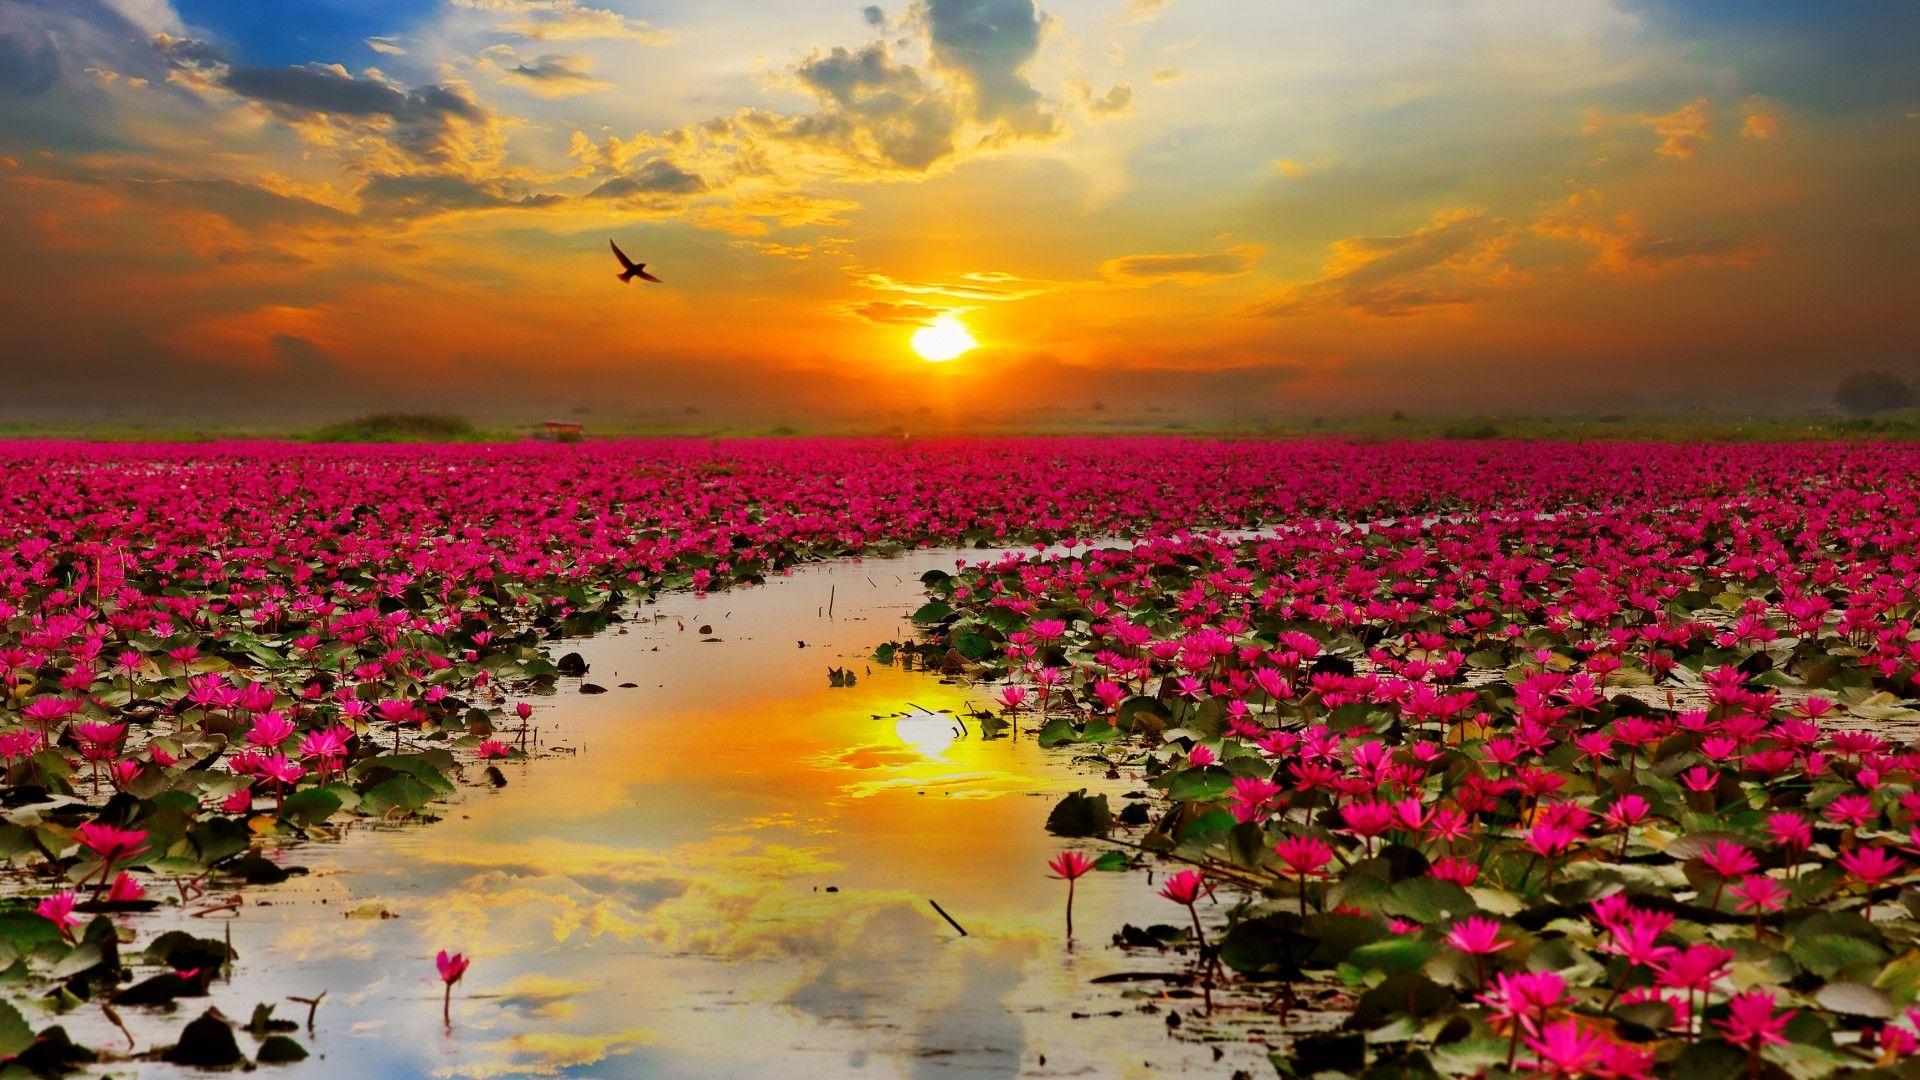 Flower Sunset Wallpapers - Top Free Flower Sunset Backgrounds